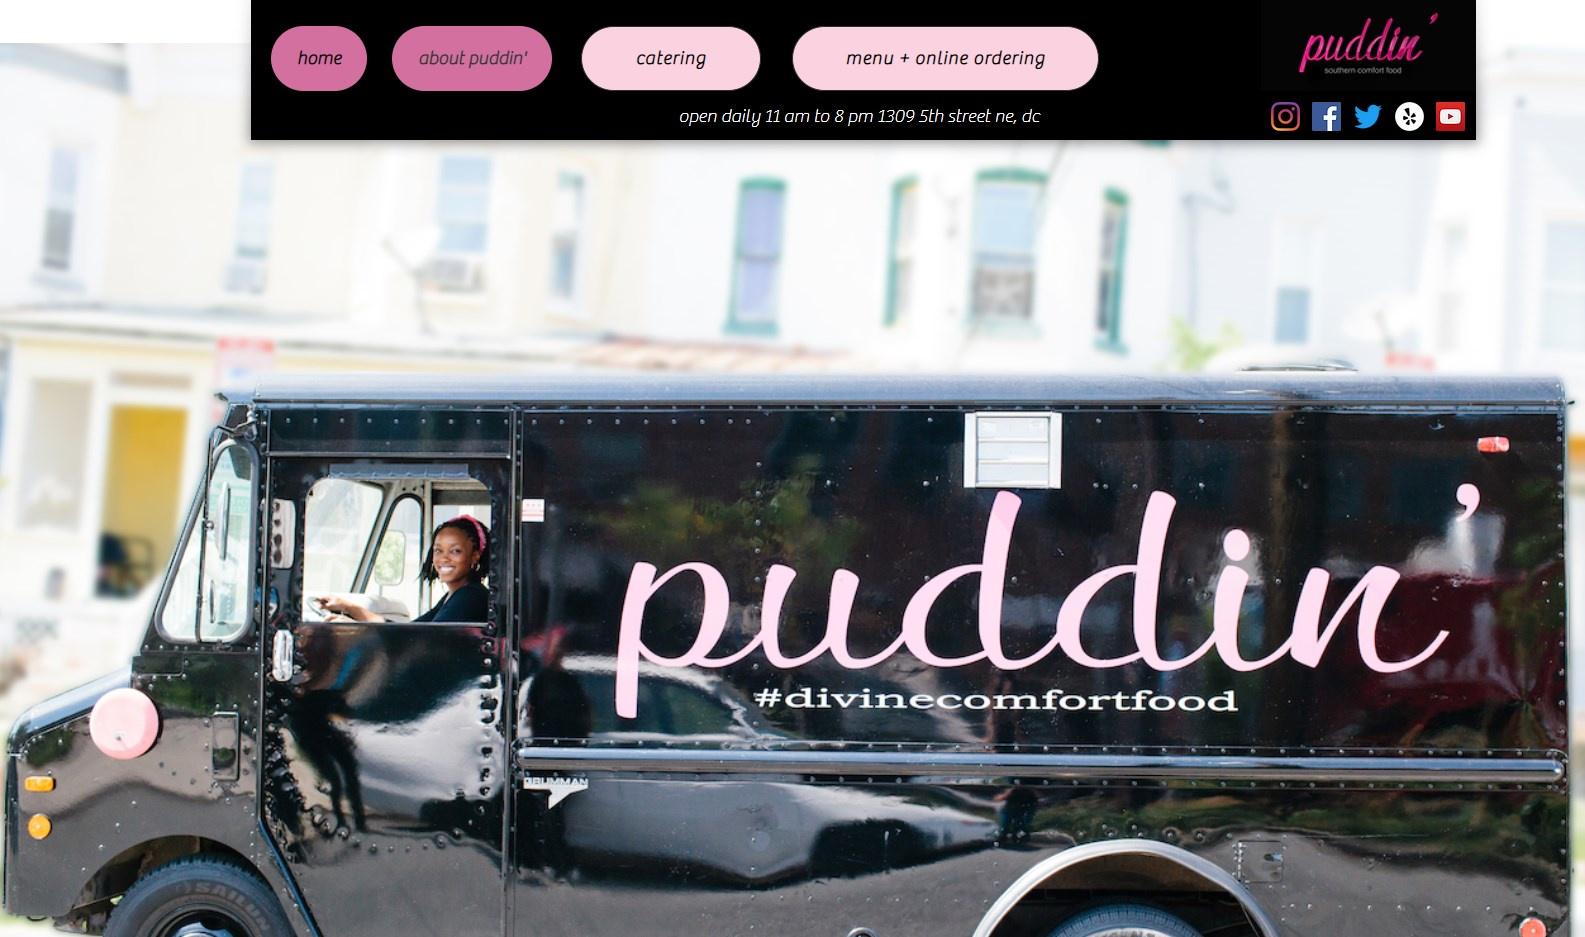 Food truck website design example from Puddin DC.